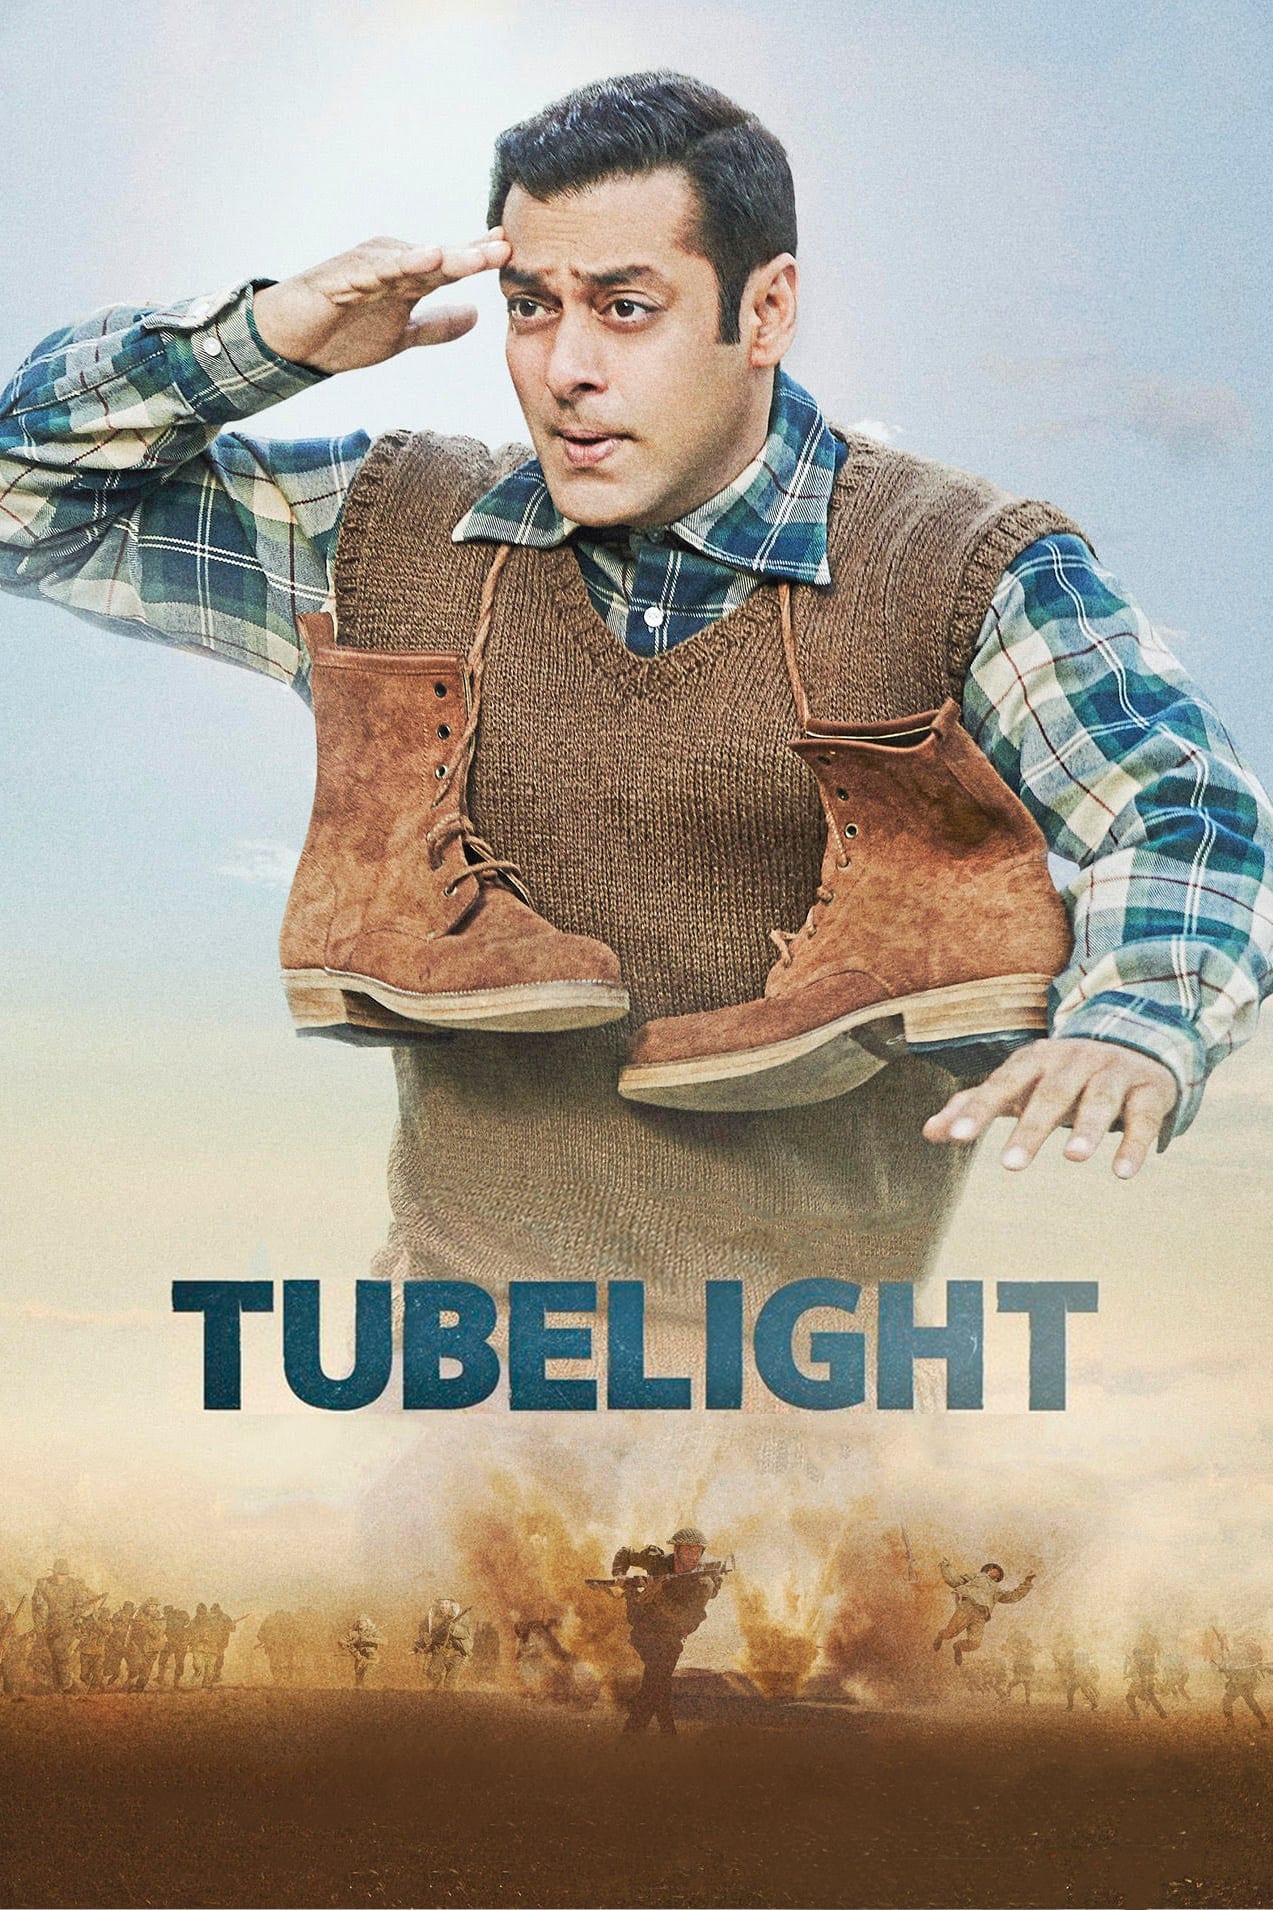 Poster for the movie "Tubelight"